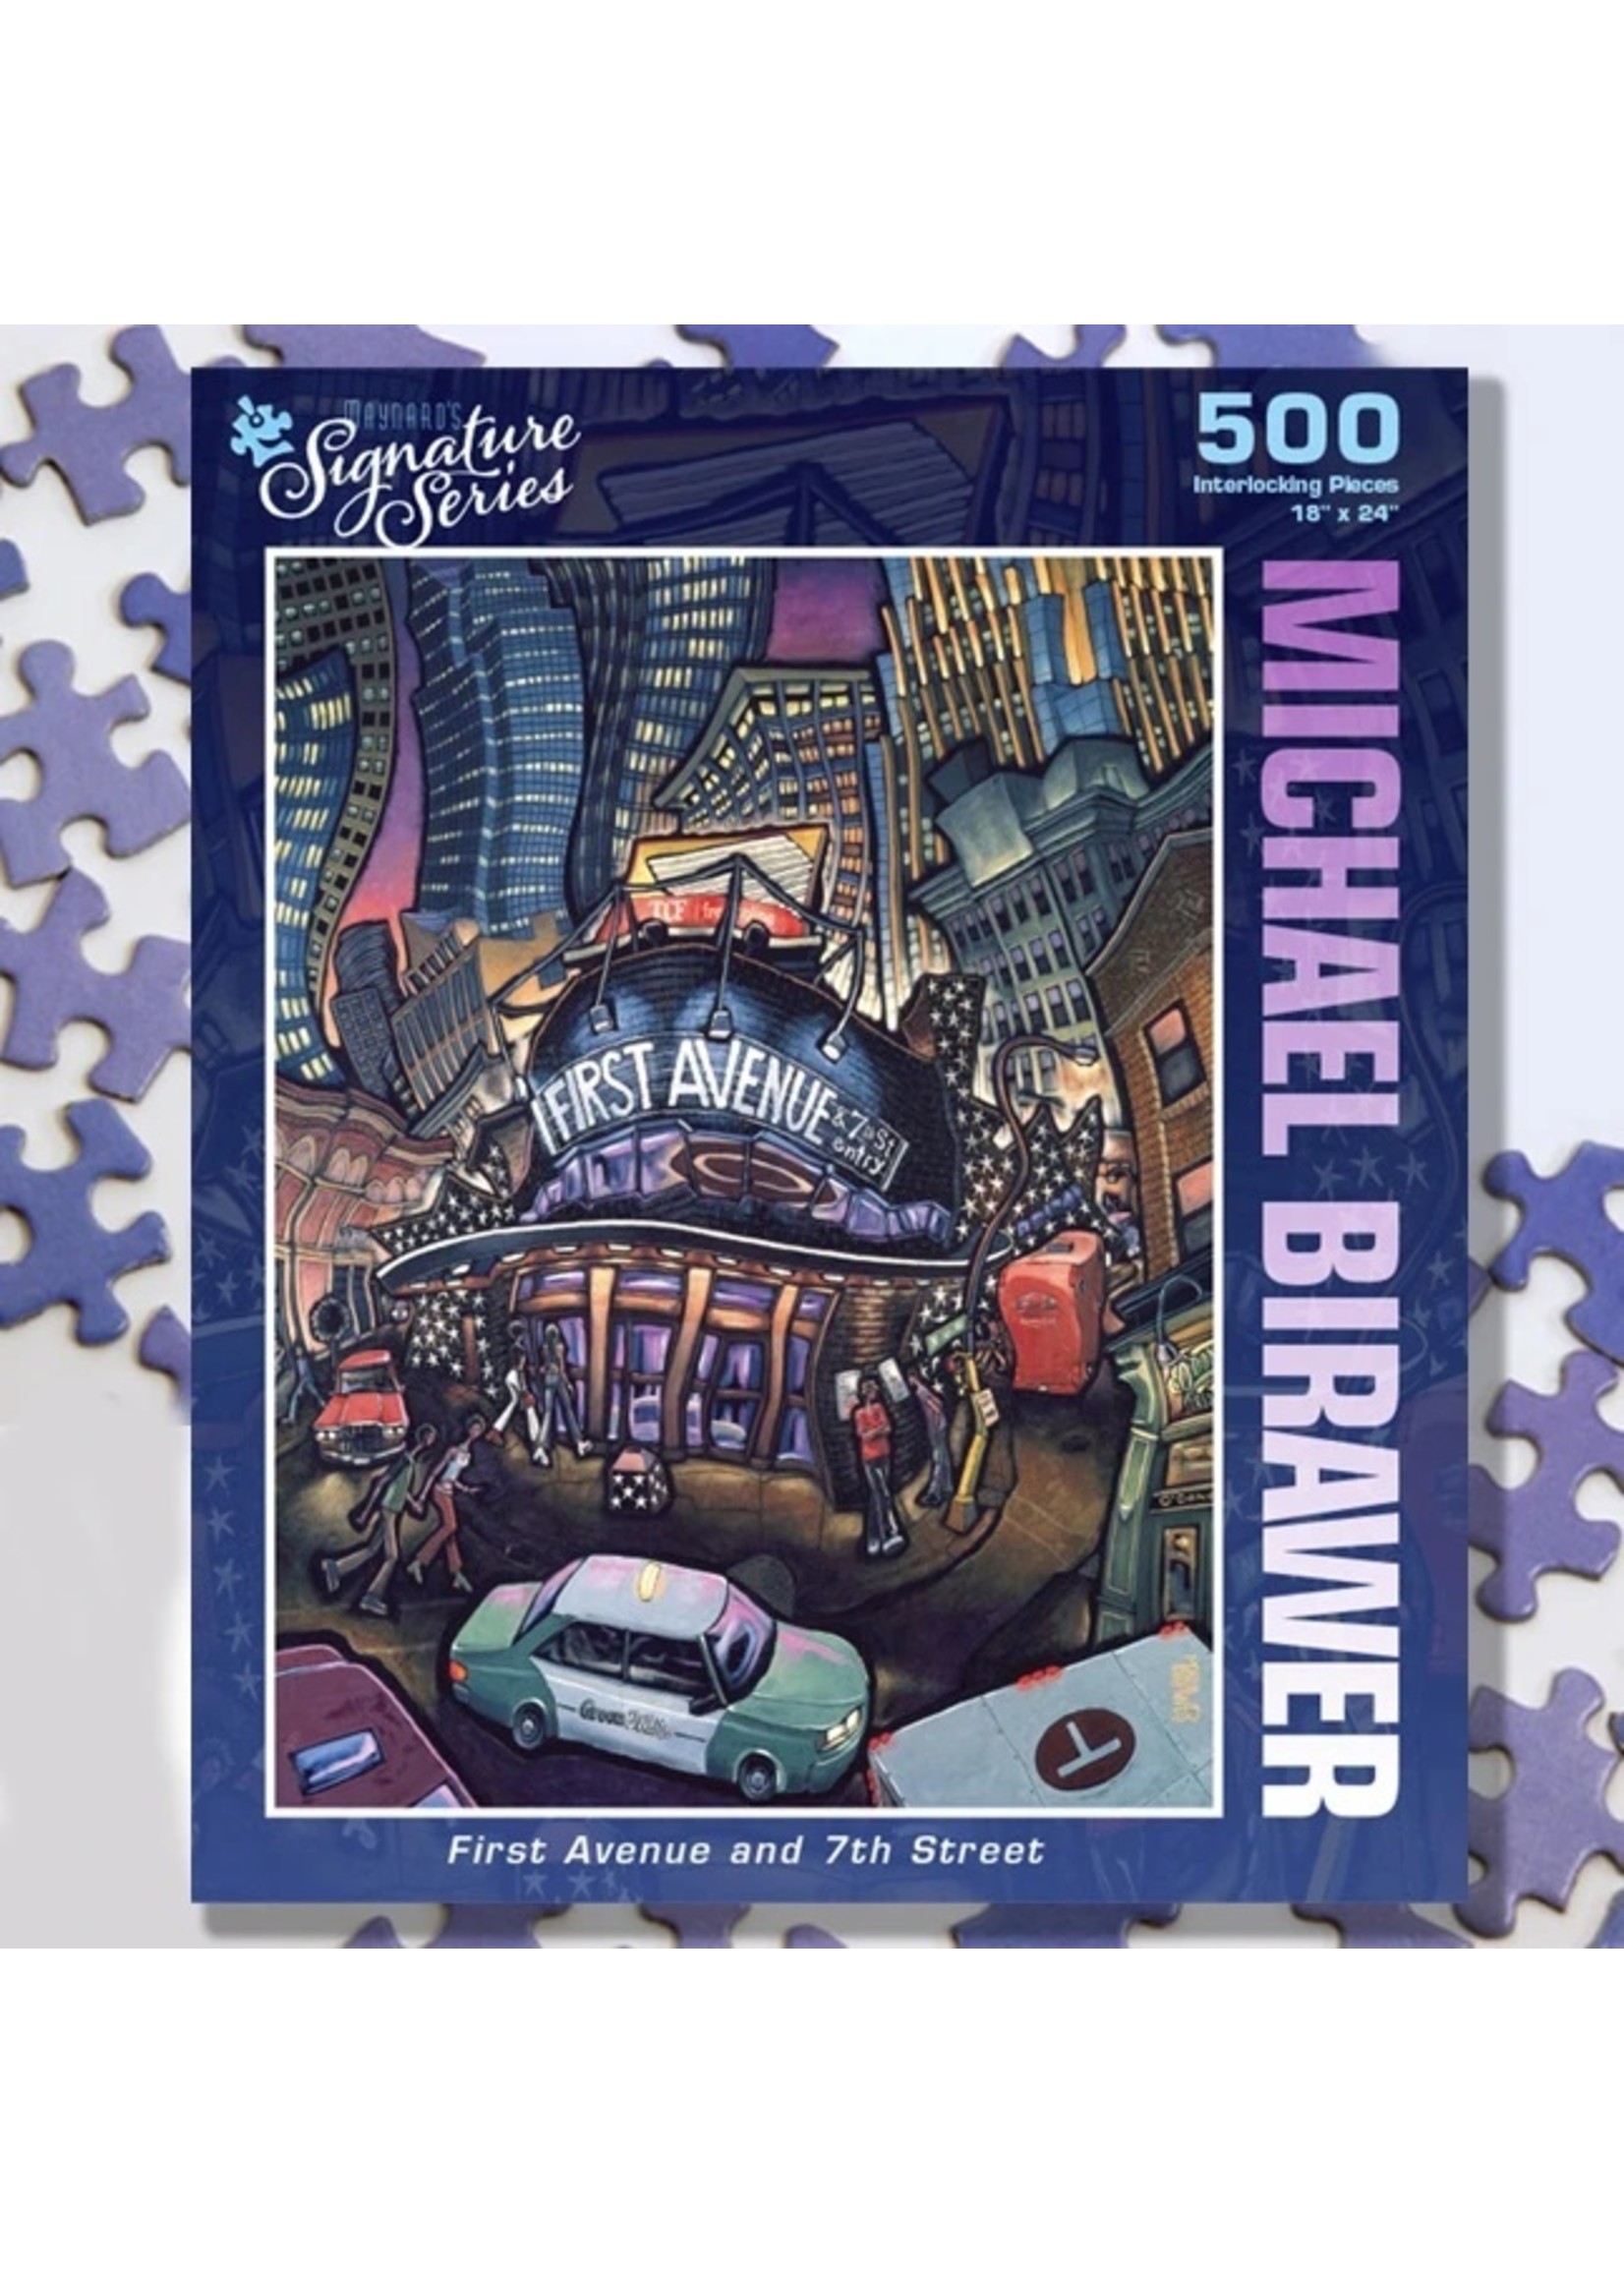 Puzzle Twist First Avenue and 7th Street - 500 Piece Puzzle